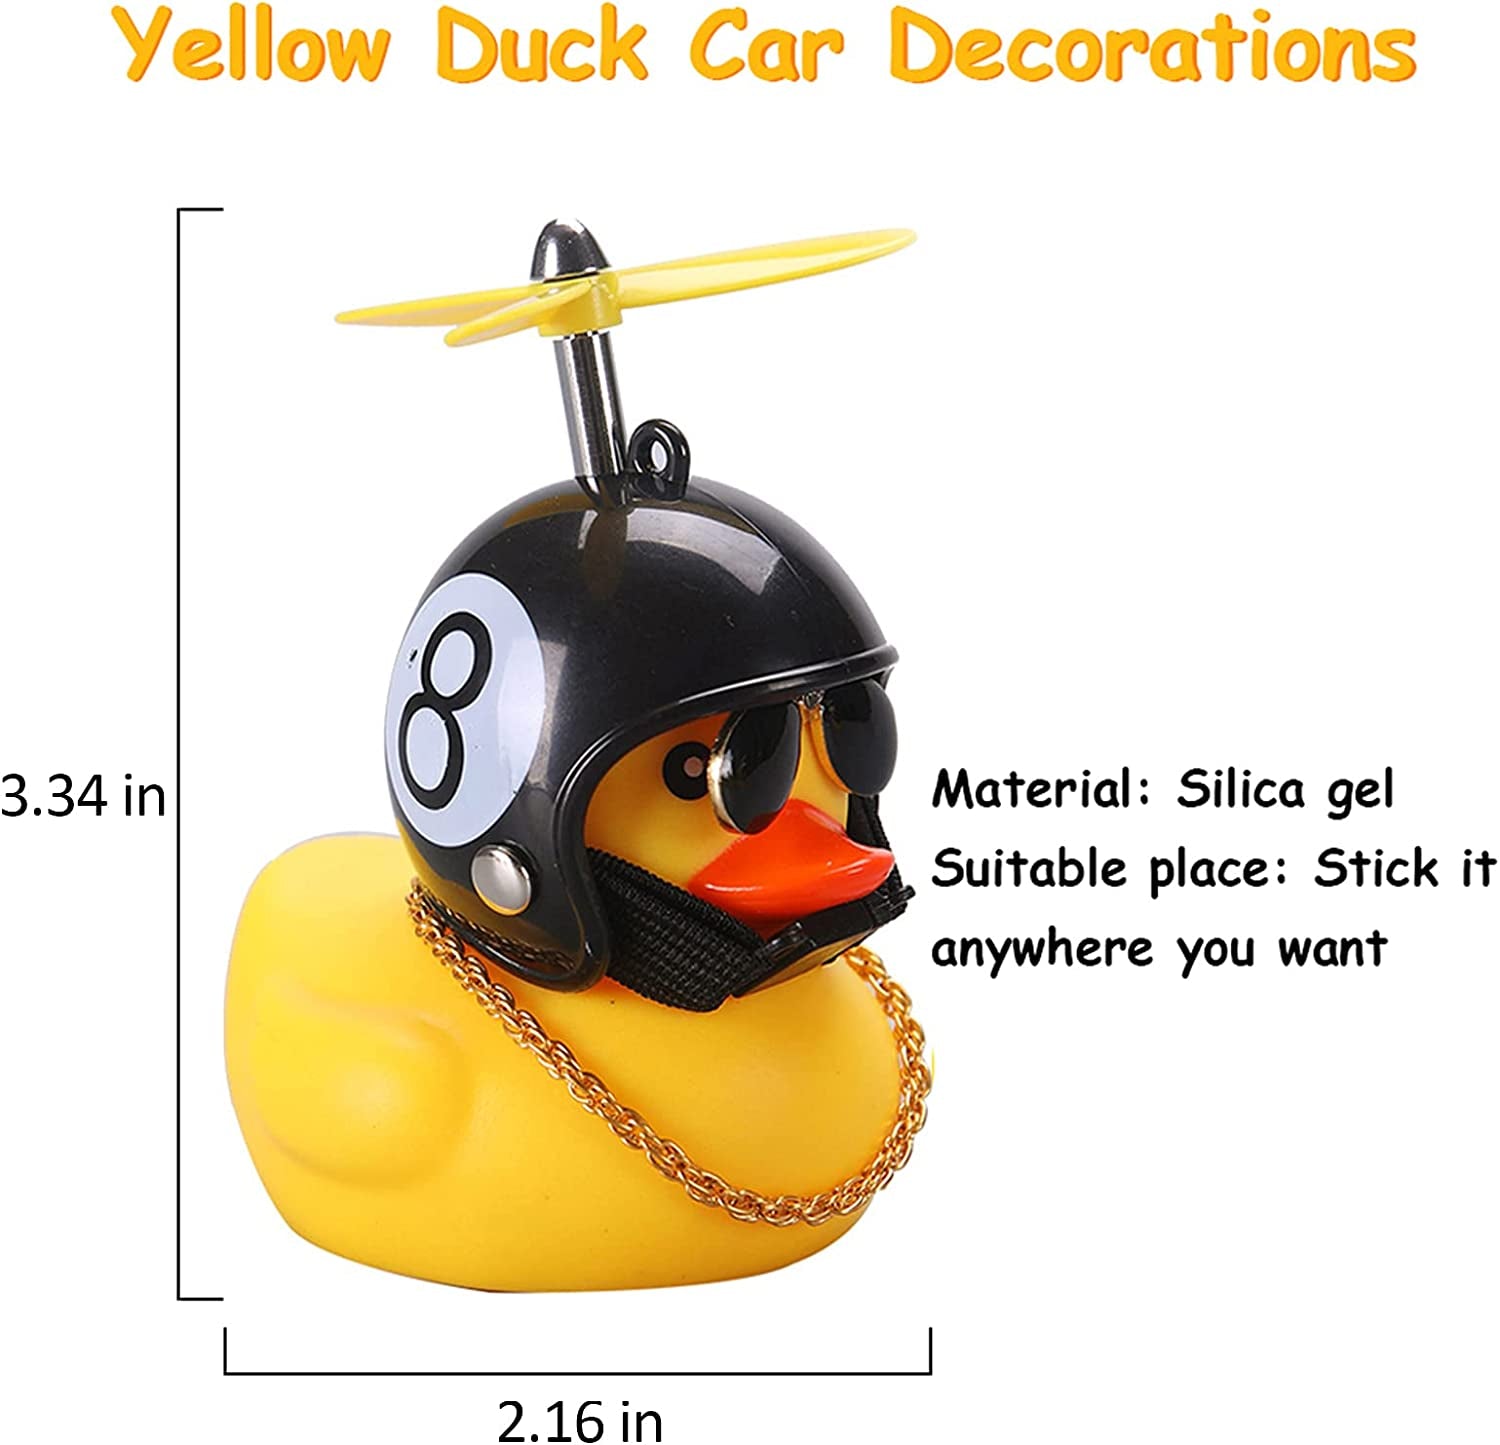 Rubber Duck Car Ornaments Yellow Duck Car Dashboard Decorations with Propeller Helmet